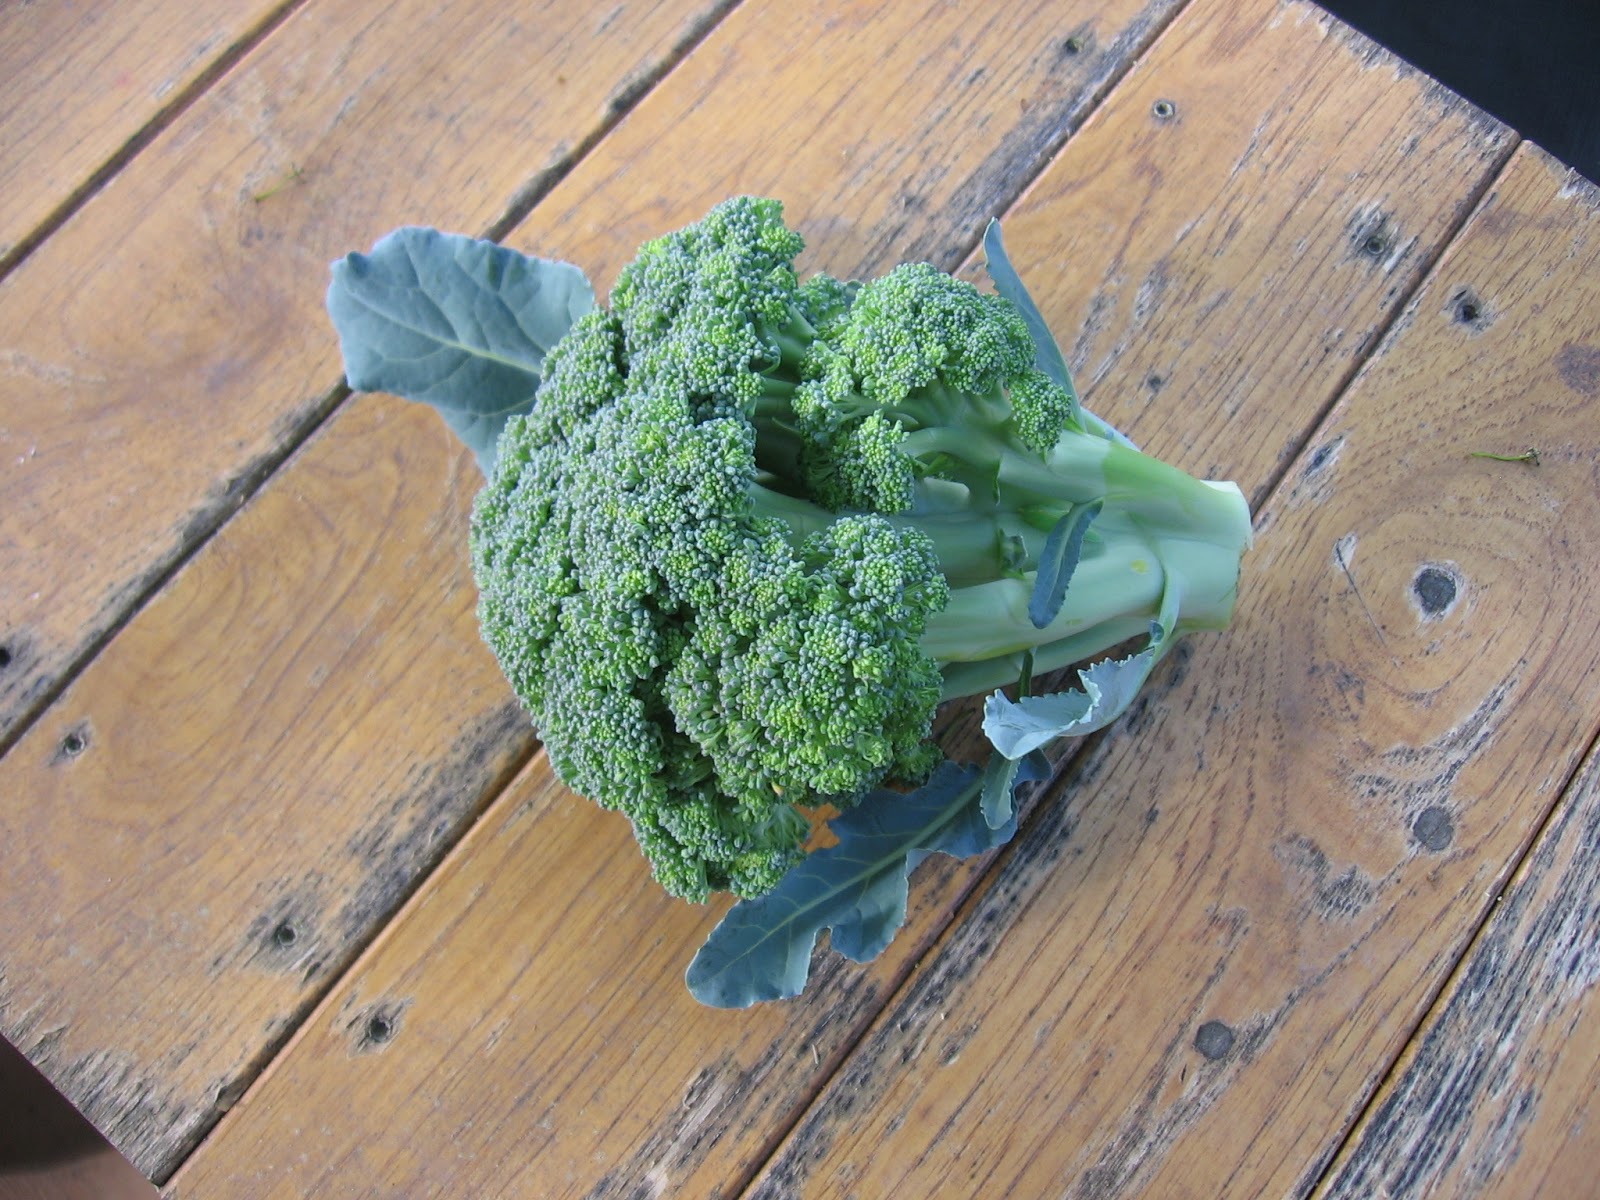 Mike's Bean Patch: Monday May 22 - First broccoli How Many Cups Is A Pound Of Broccoli